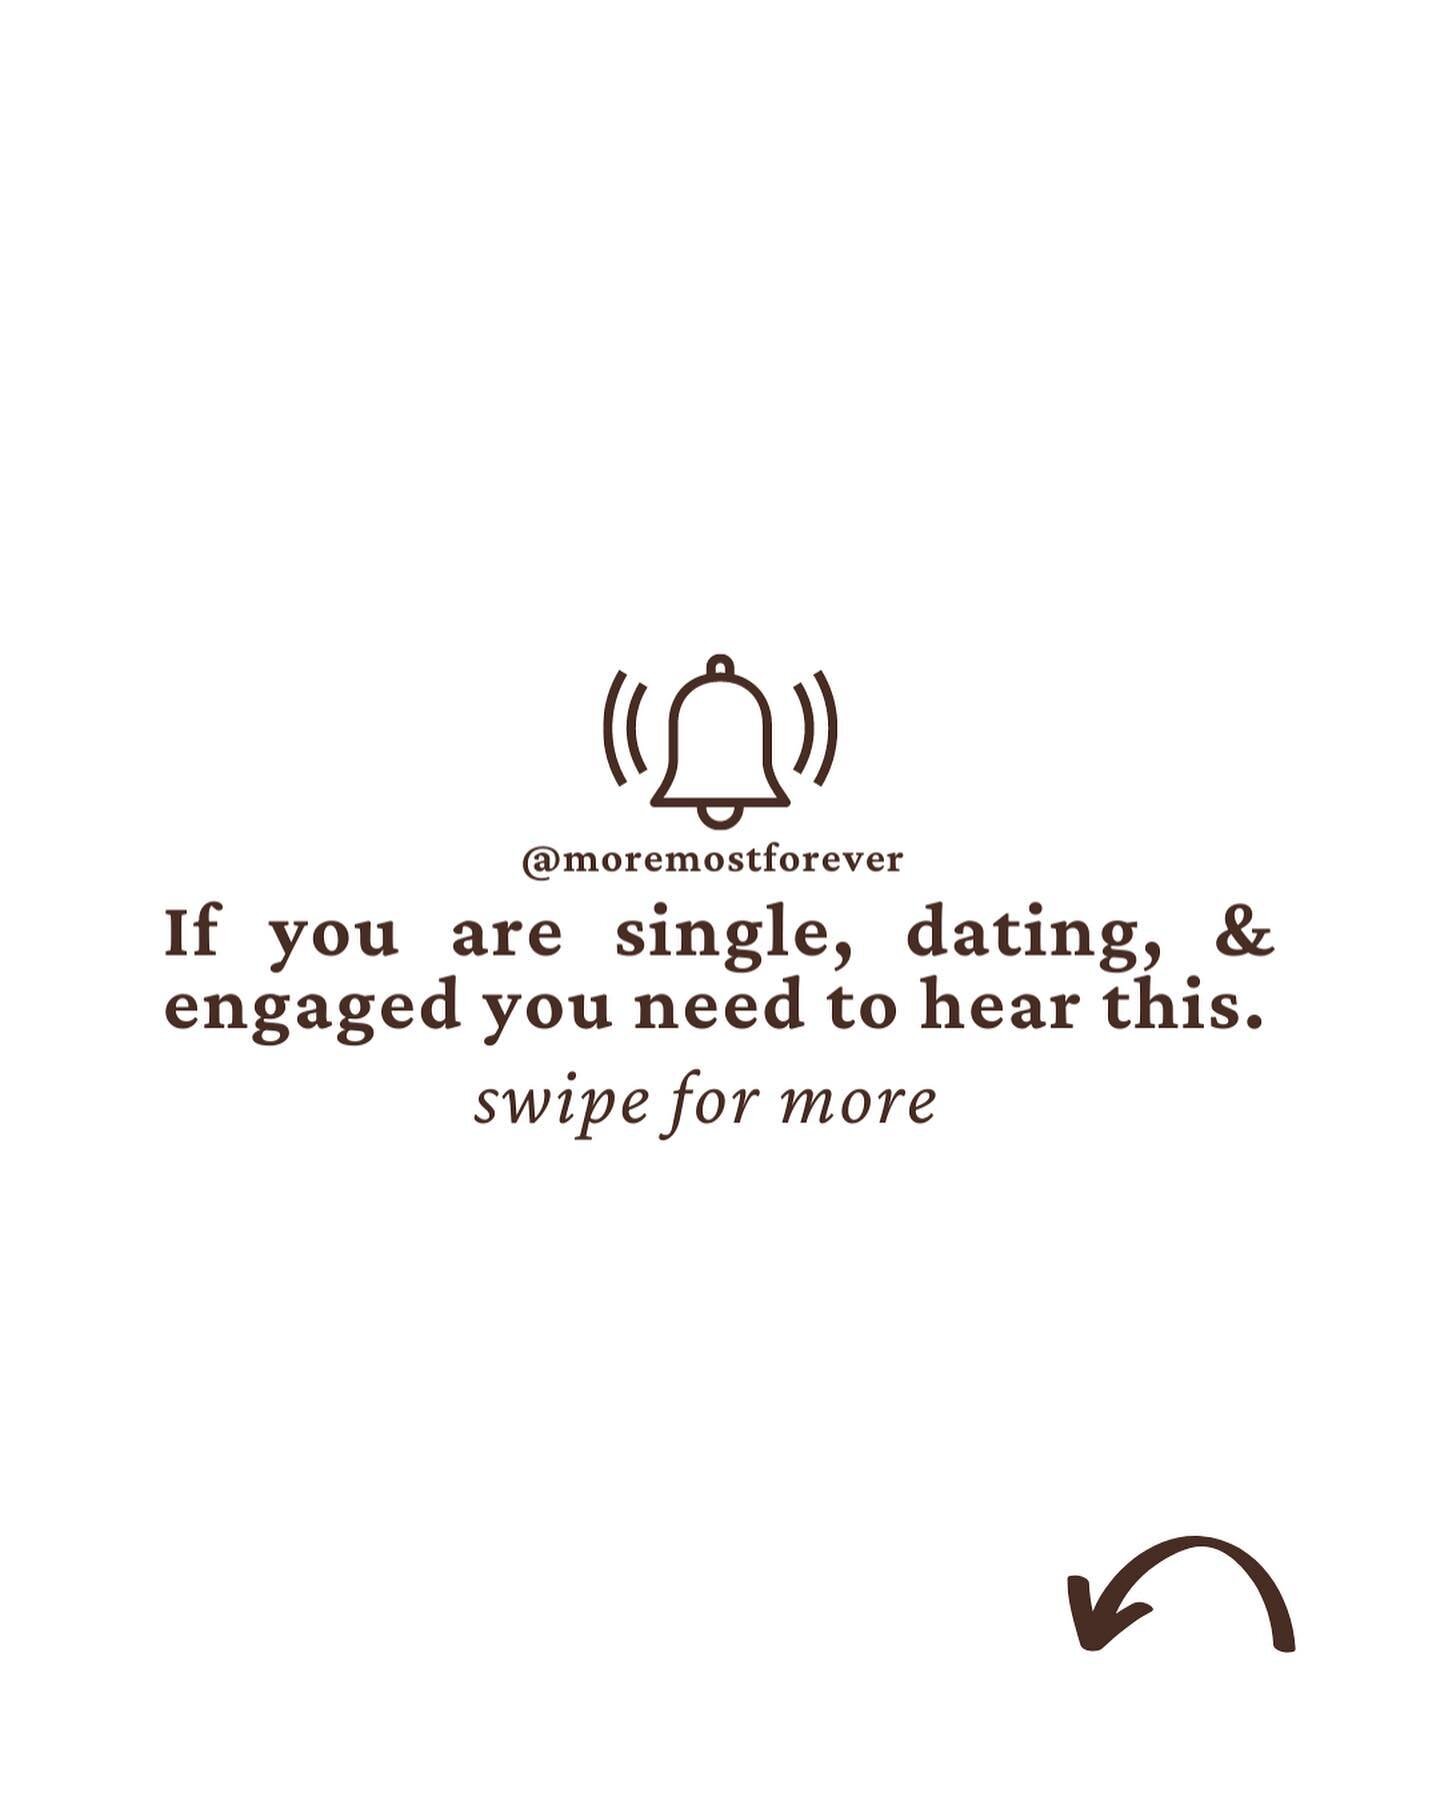 Here&rsquo;s a gift to help you on your dating journey! Link in our bio! SWIPE! 

#datingadvice #datinginyour30s #datingtips #datinglife #datingcoach #summerlove #summerlovewebinar #datinglife